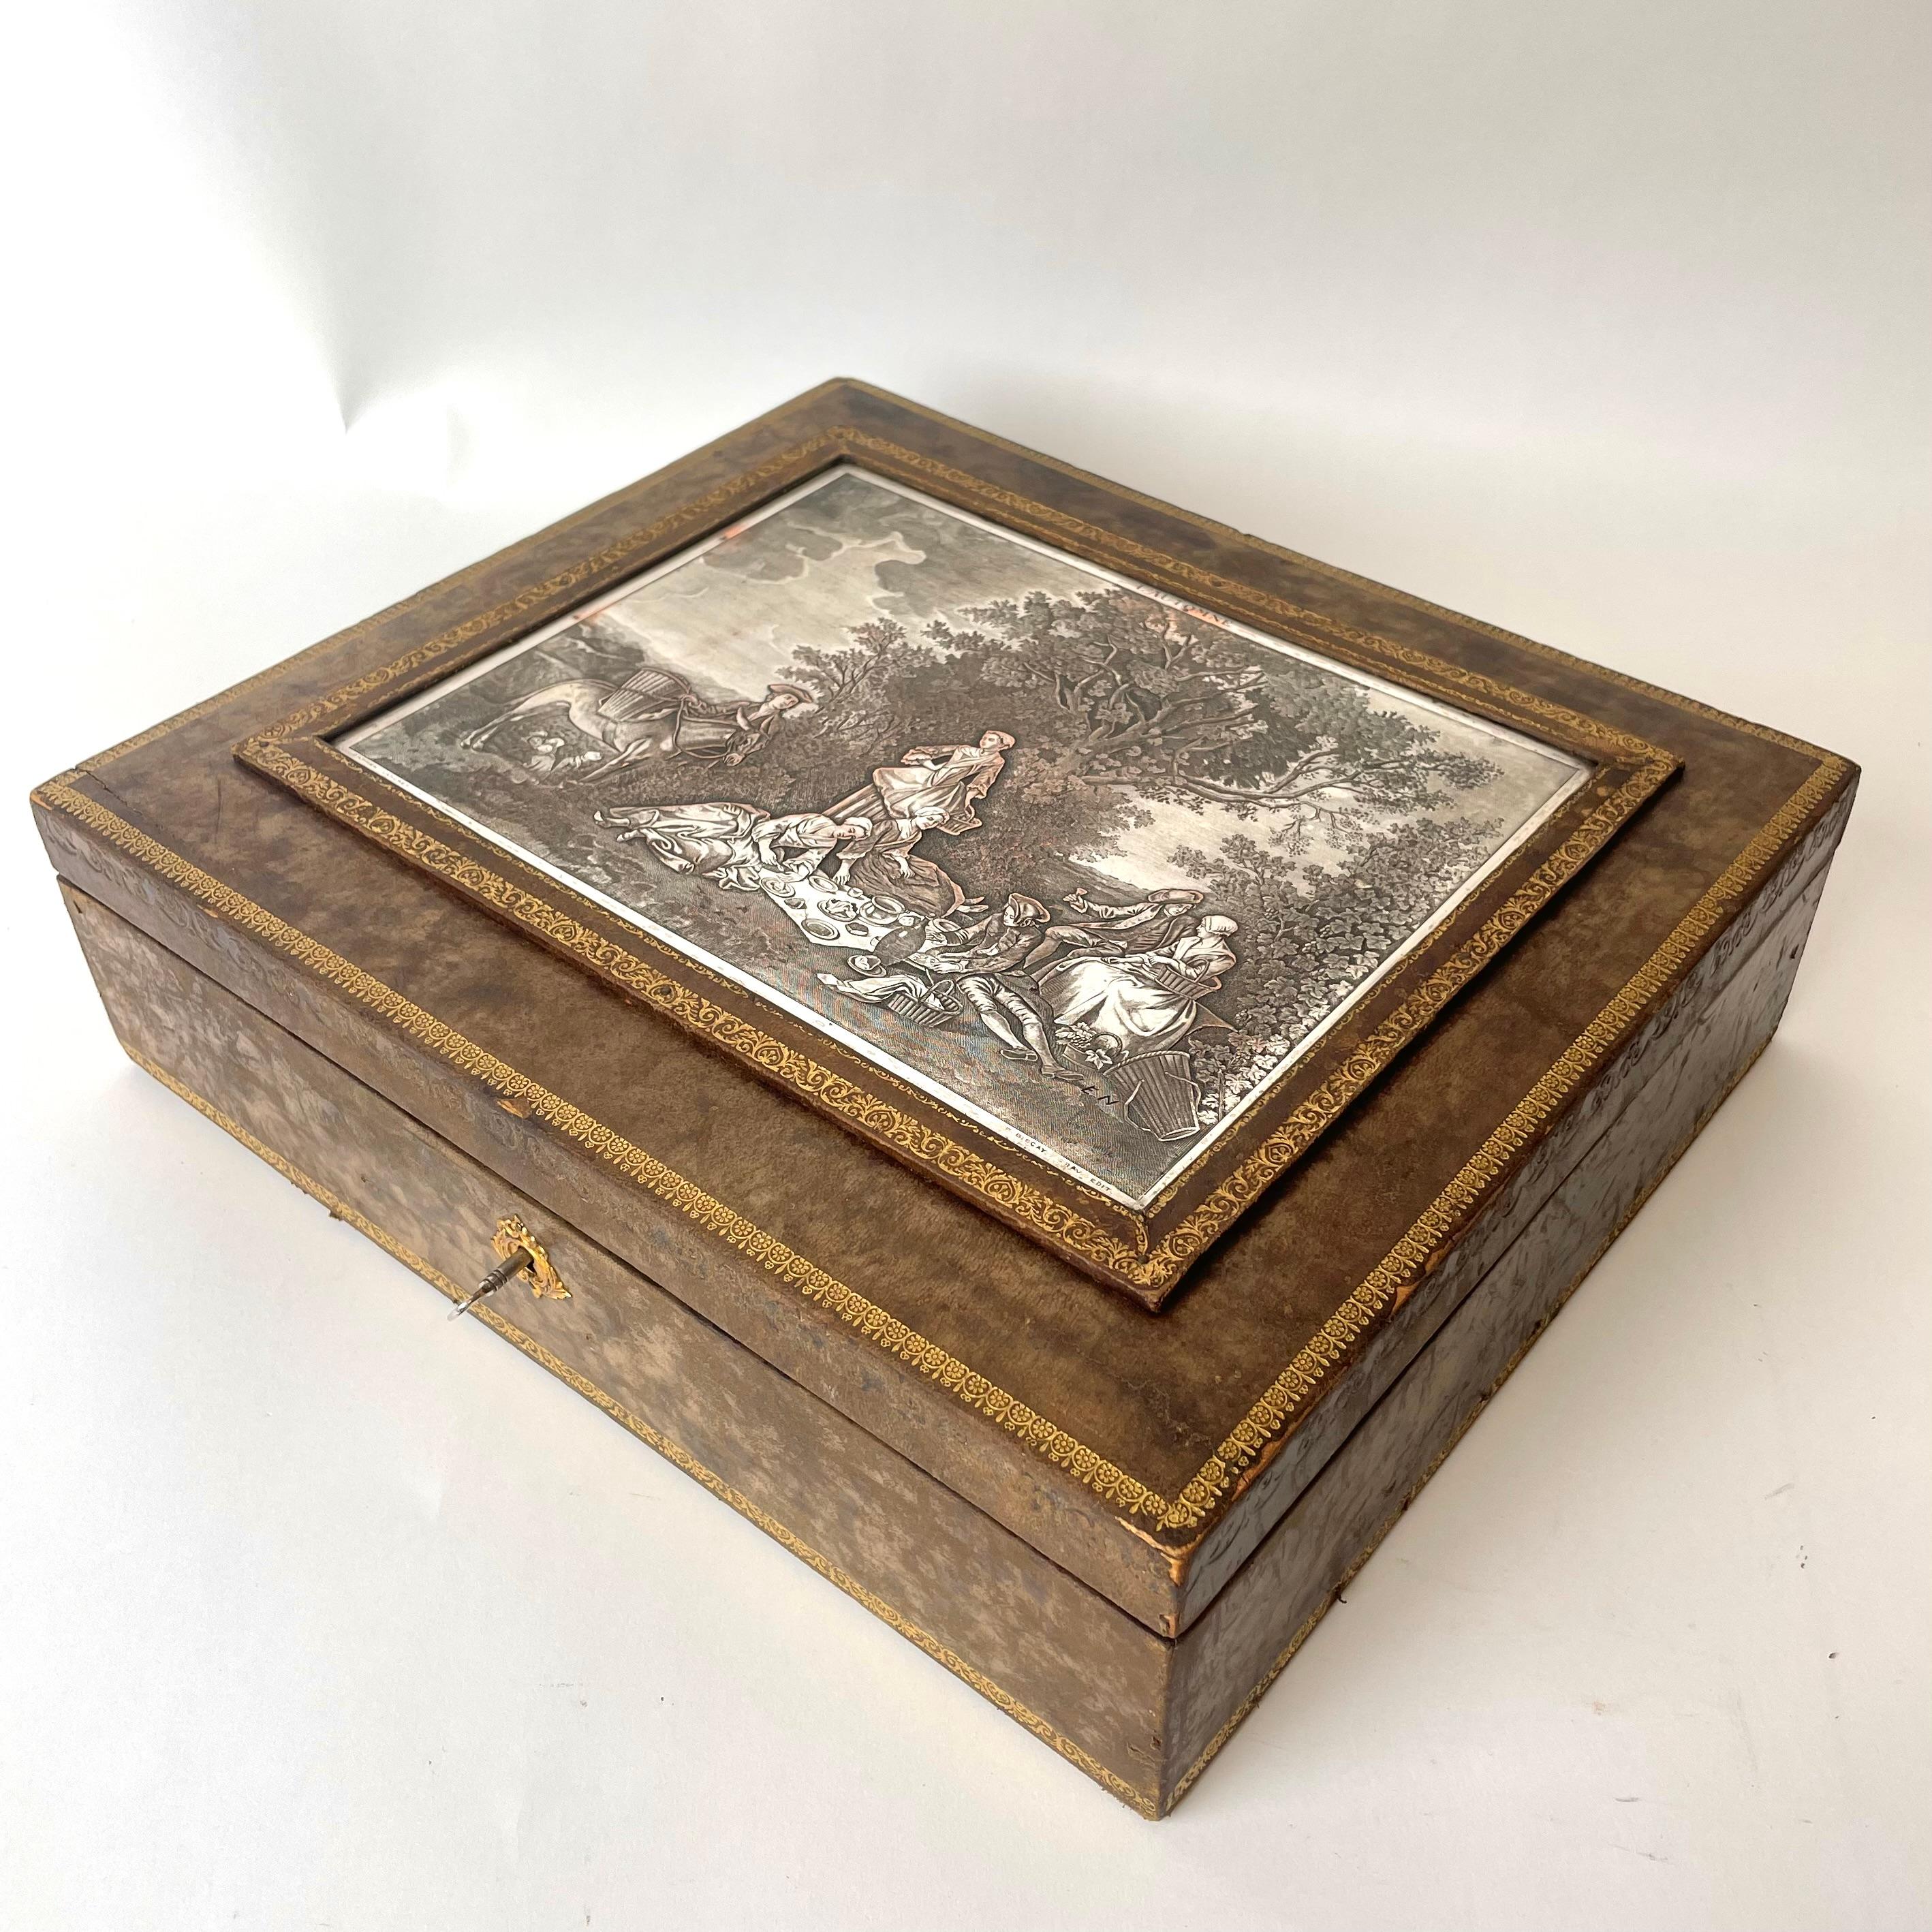 Leather Box with Decorative Silver plated Engraving based upon Lancret. Made in France in the late 19th century. 
Beautiful leather box with embossed gold details at edges. A silver plated engraved copperplate by Paris-based 19th century engraving